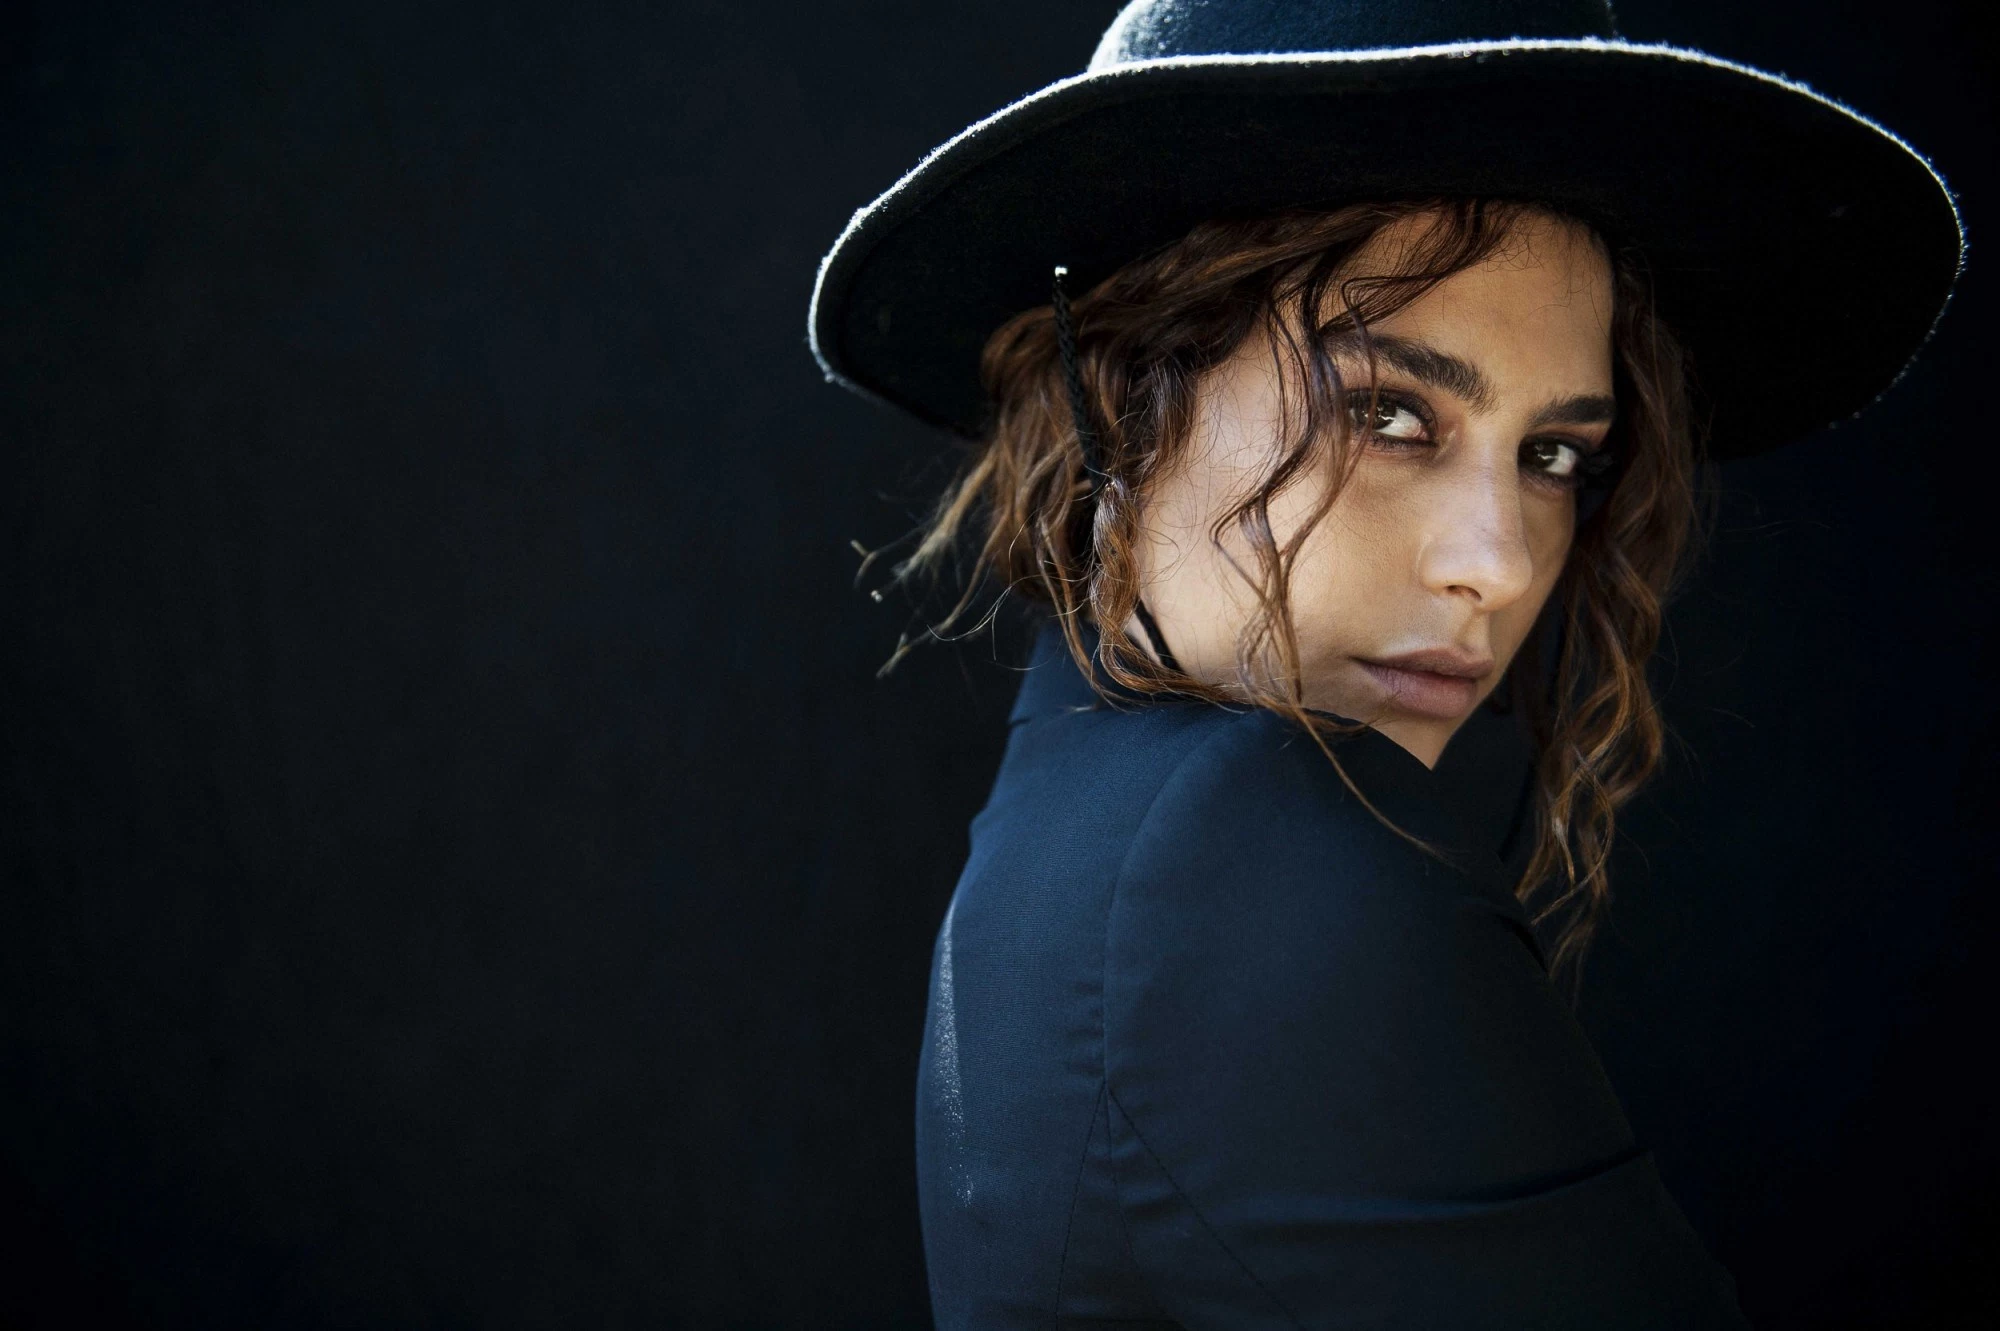 Nadia Hilker Wallpapers Images Photos Pictures Backgrounds